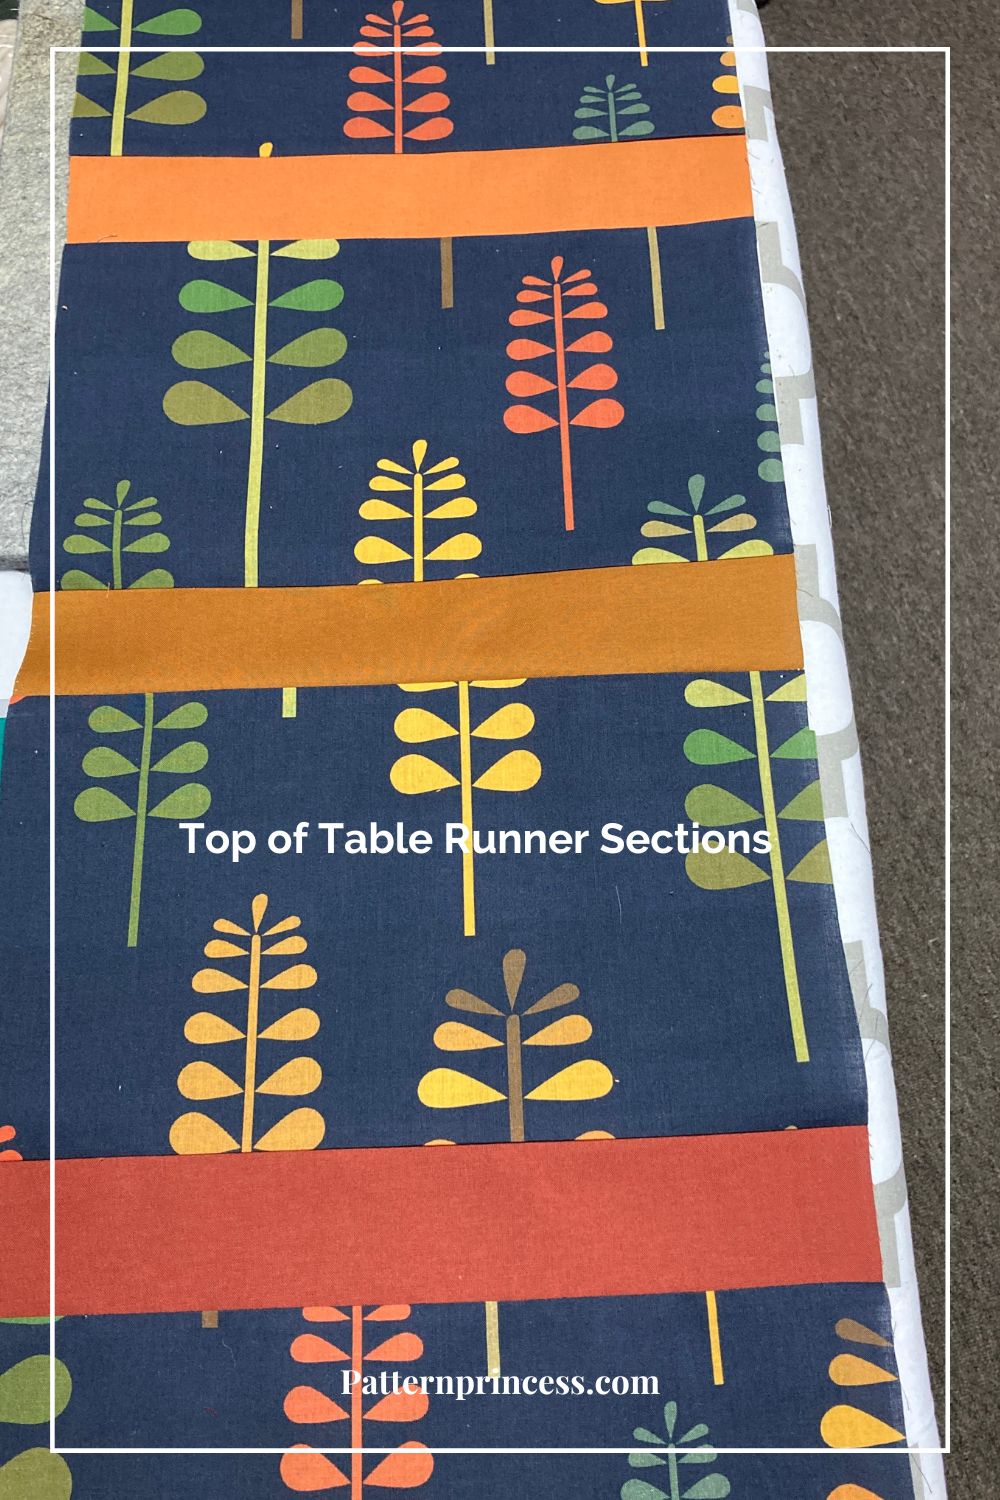 Top of Table Runner Sections